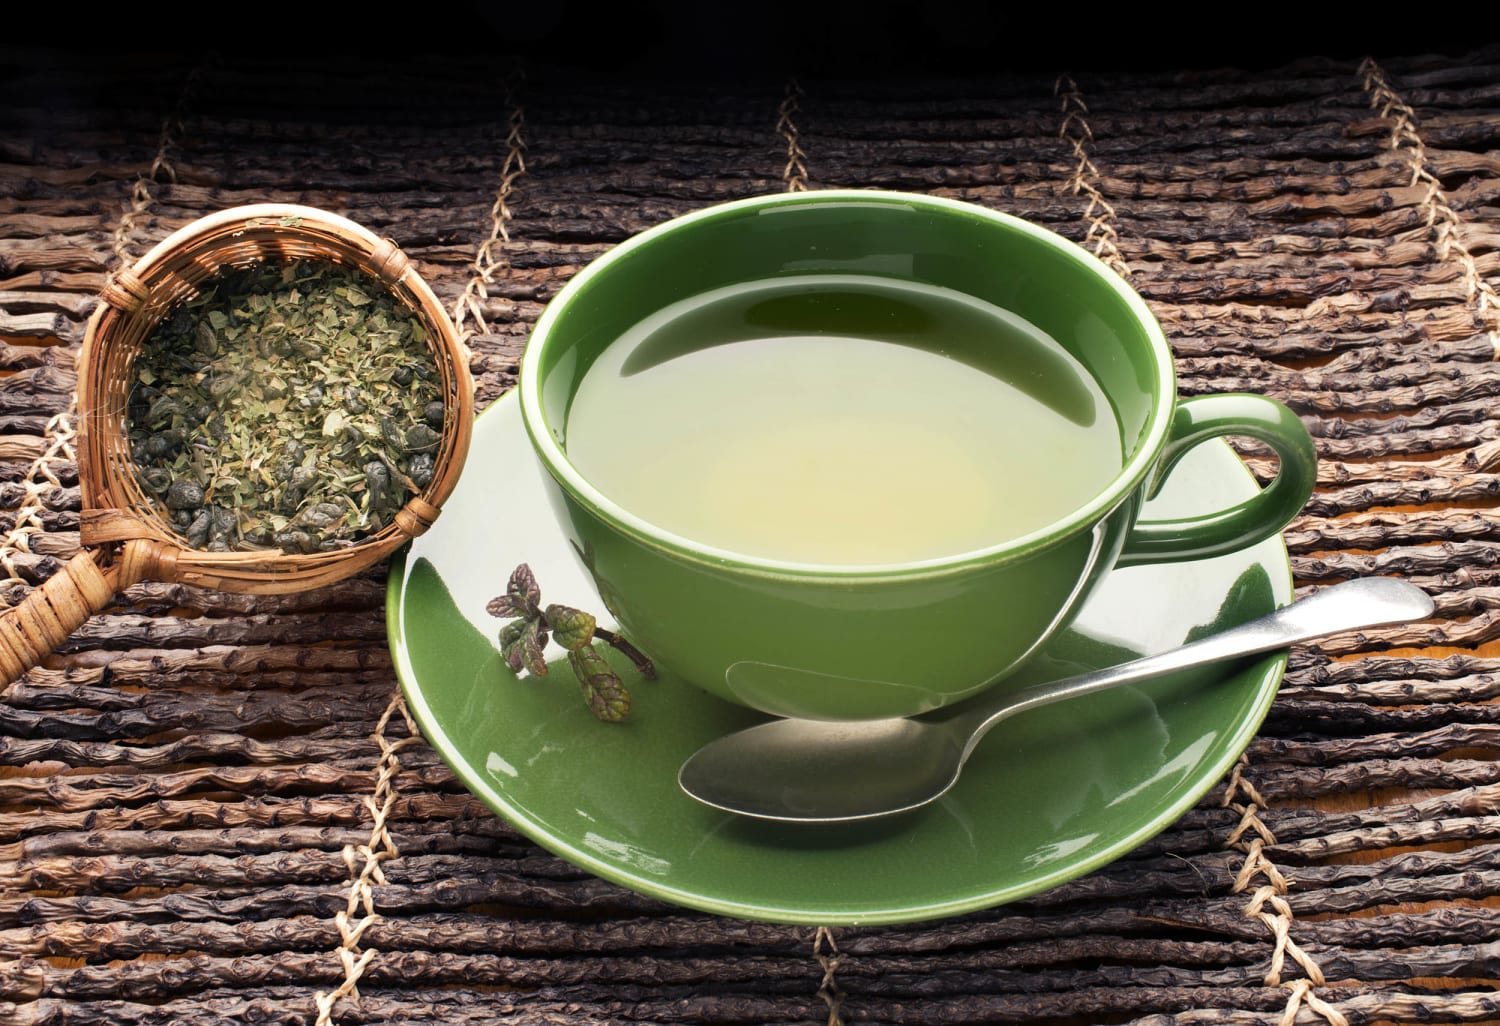 Is green tea good for you? Dietitian explains its effect on weight loss, cancer risk